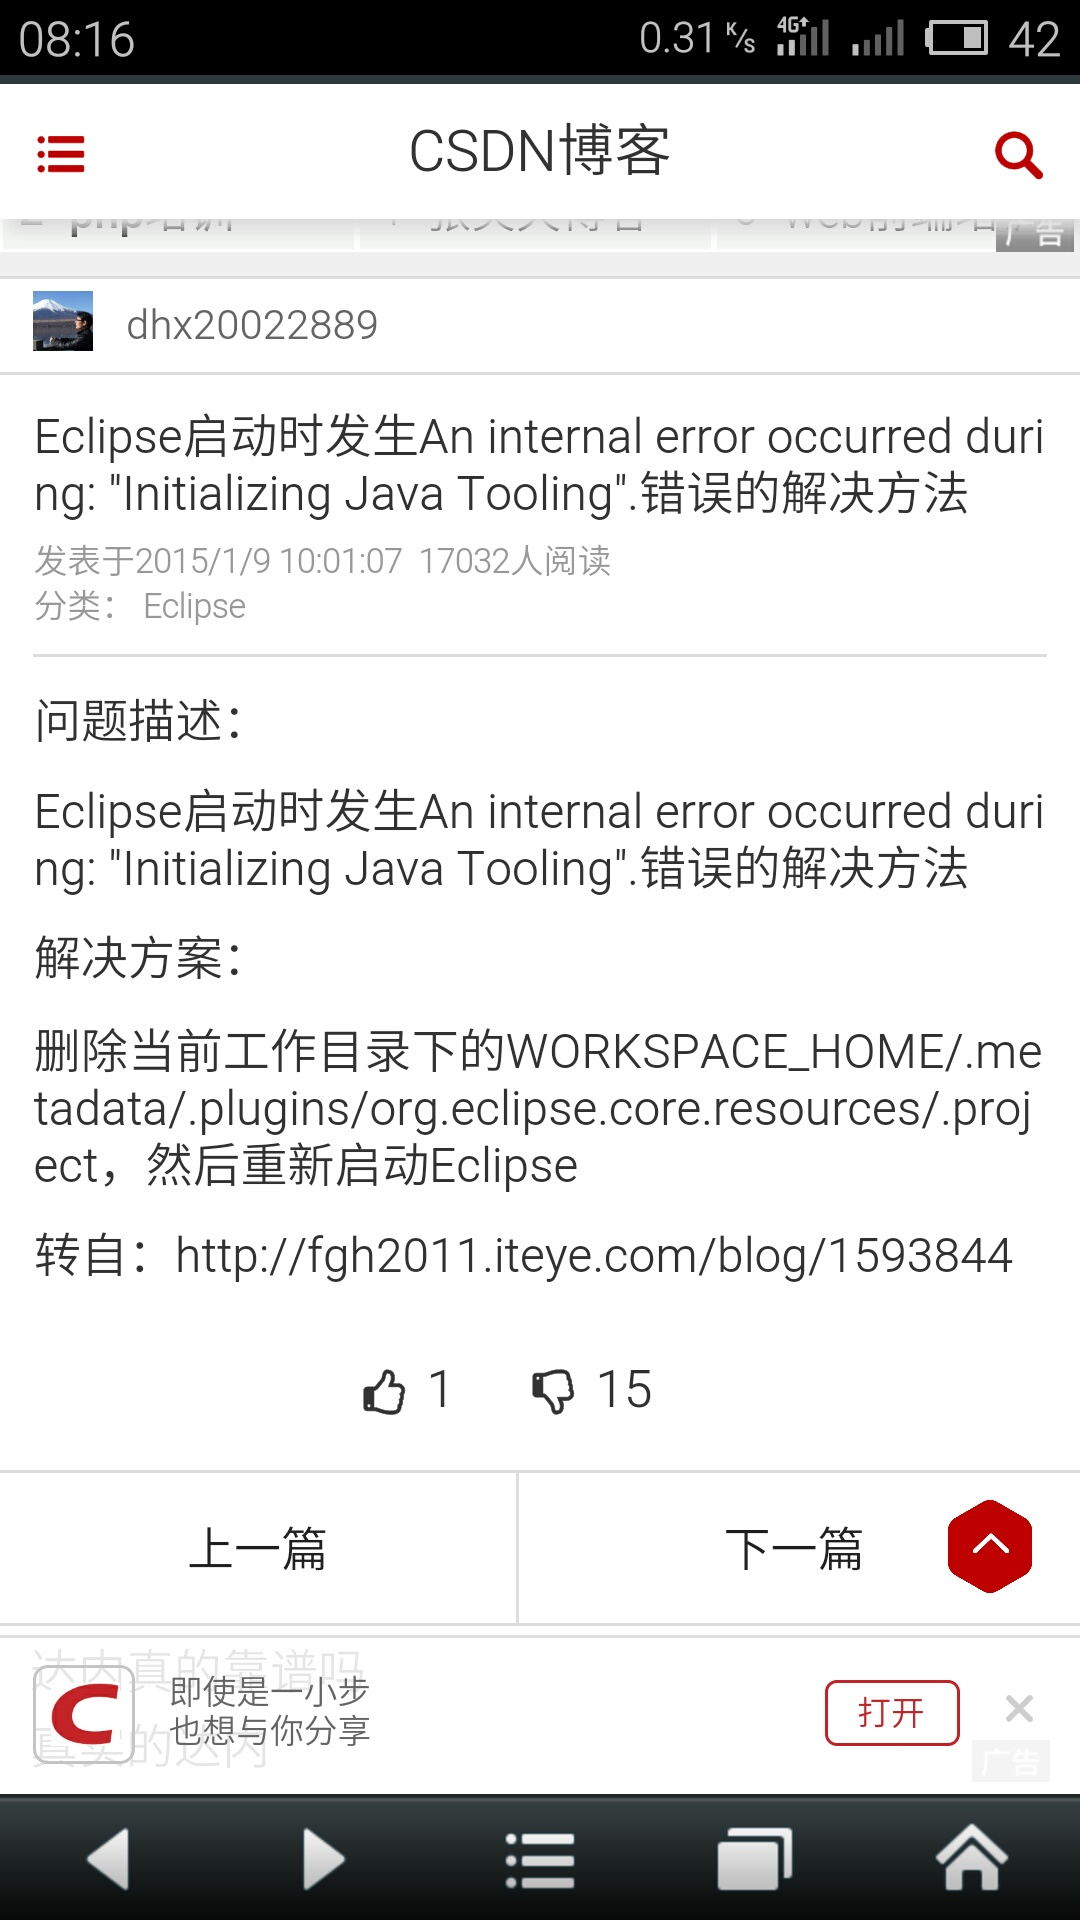 Eclipse启动时发生An internal error occurred duri ng: Initializing Java Tooling